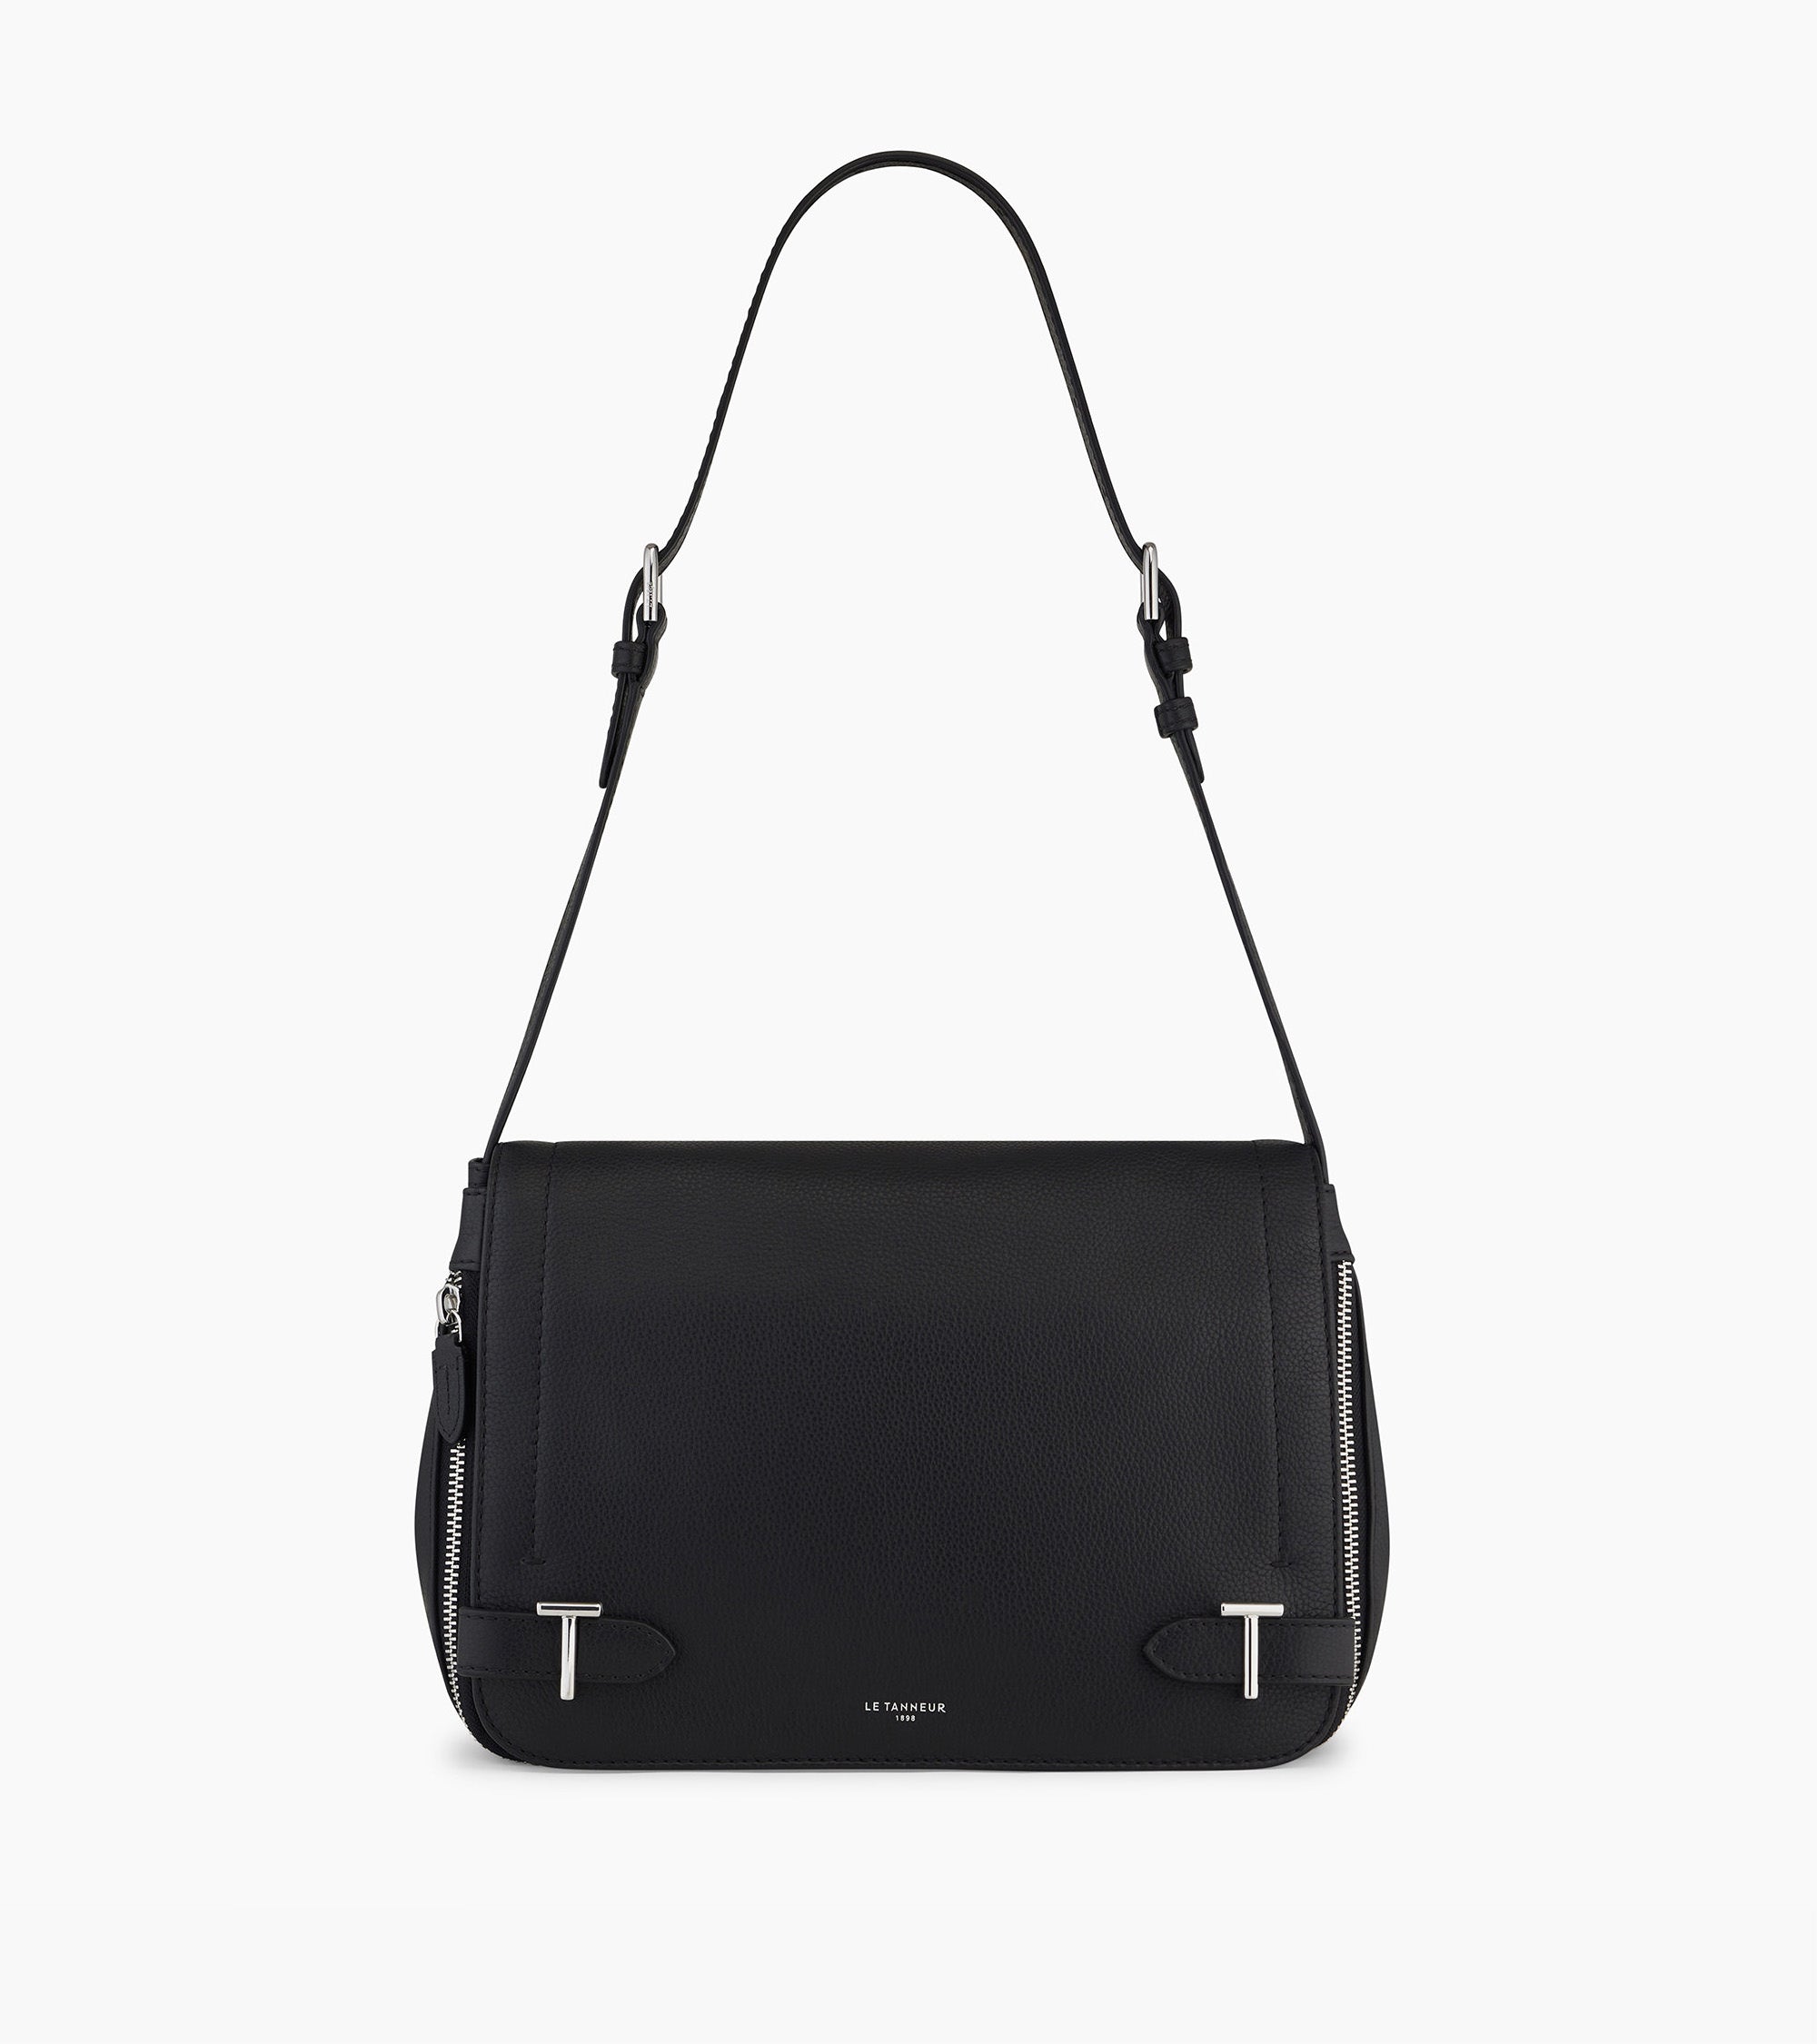 Simone medium-sized bag with crossbody strap in grained leather